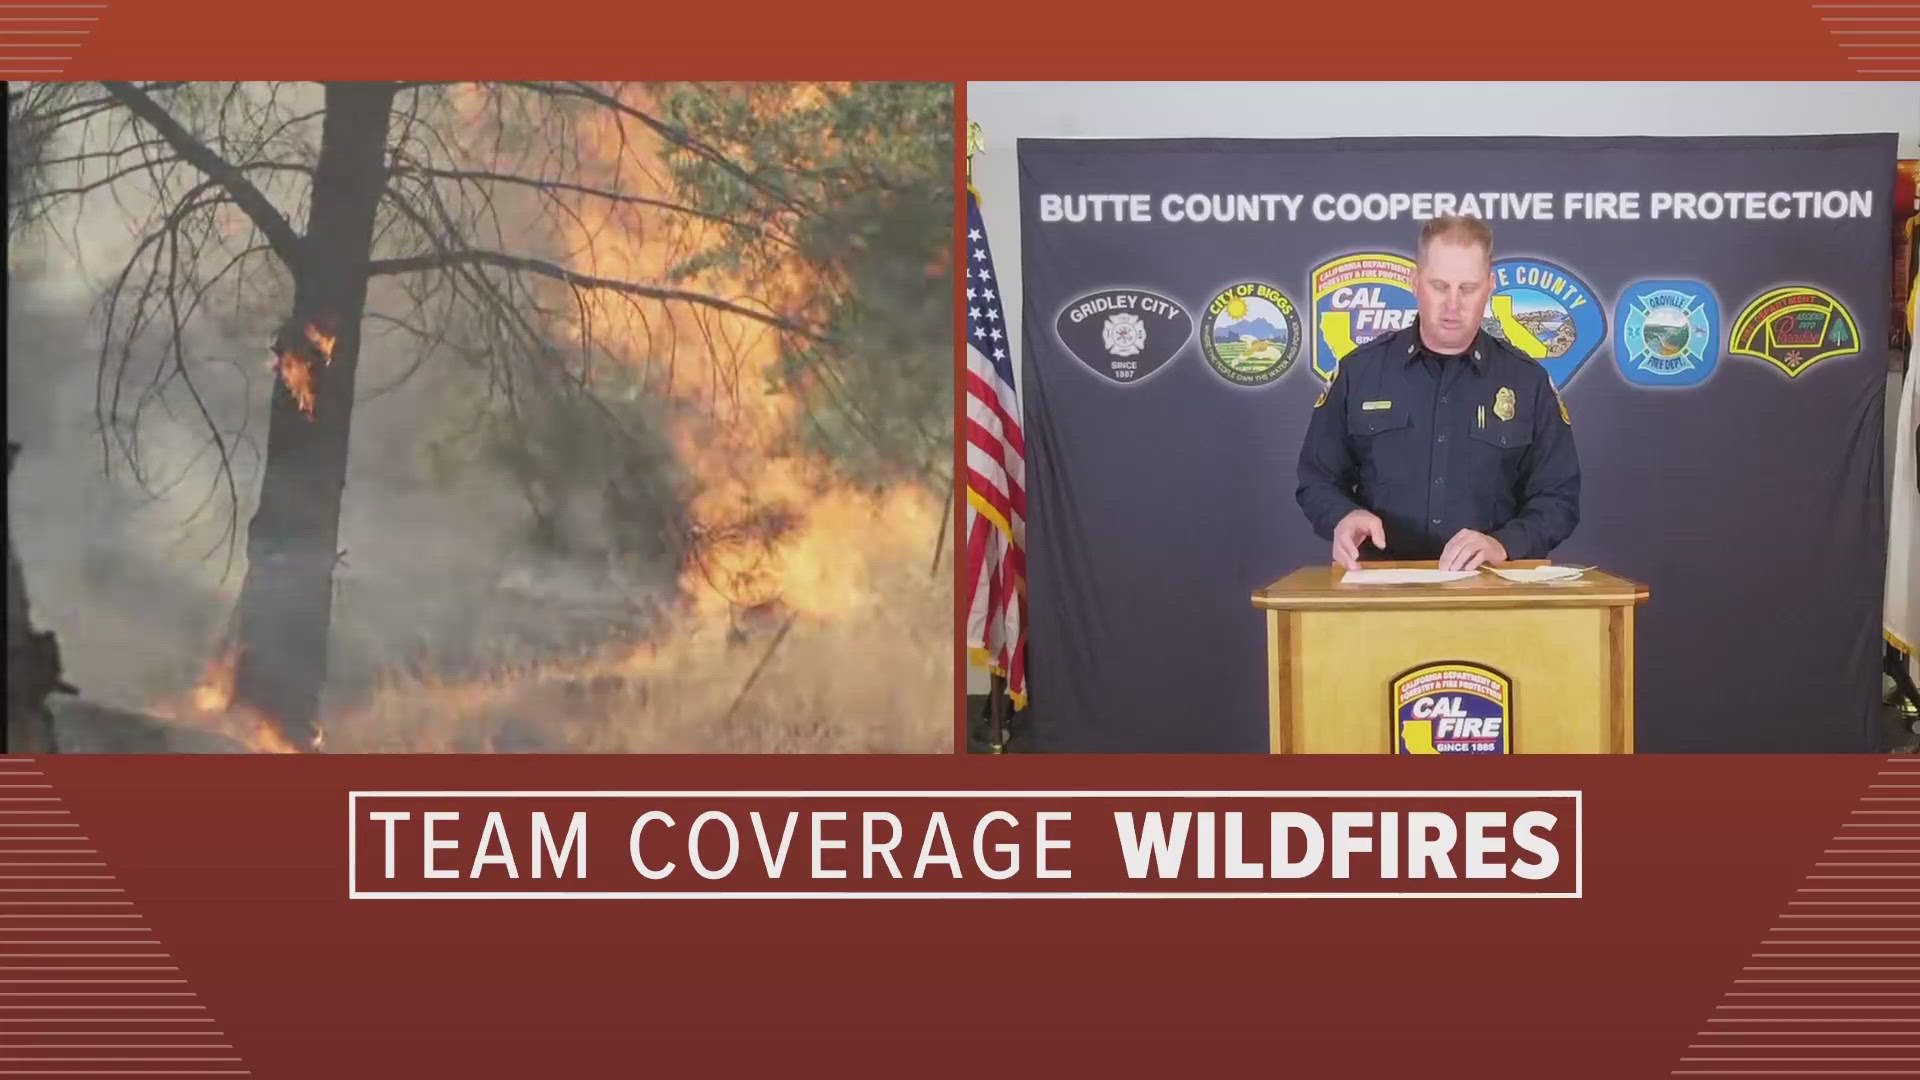 Cal Fire is providing an update on the Thompson Fire after it prompted evacuations in parts of Butte County Tuesday afternoon.